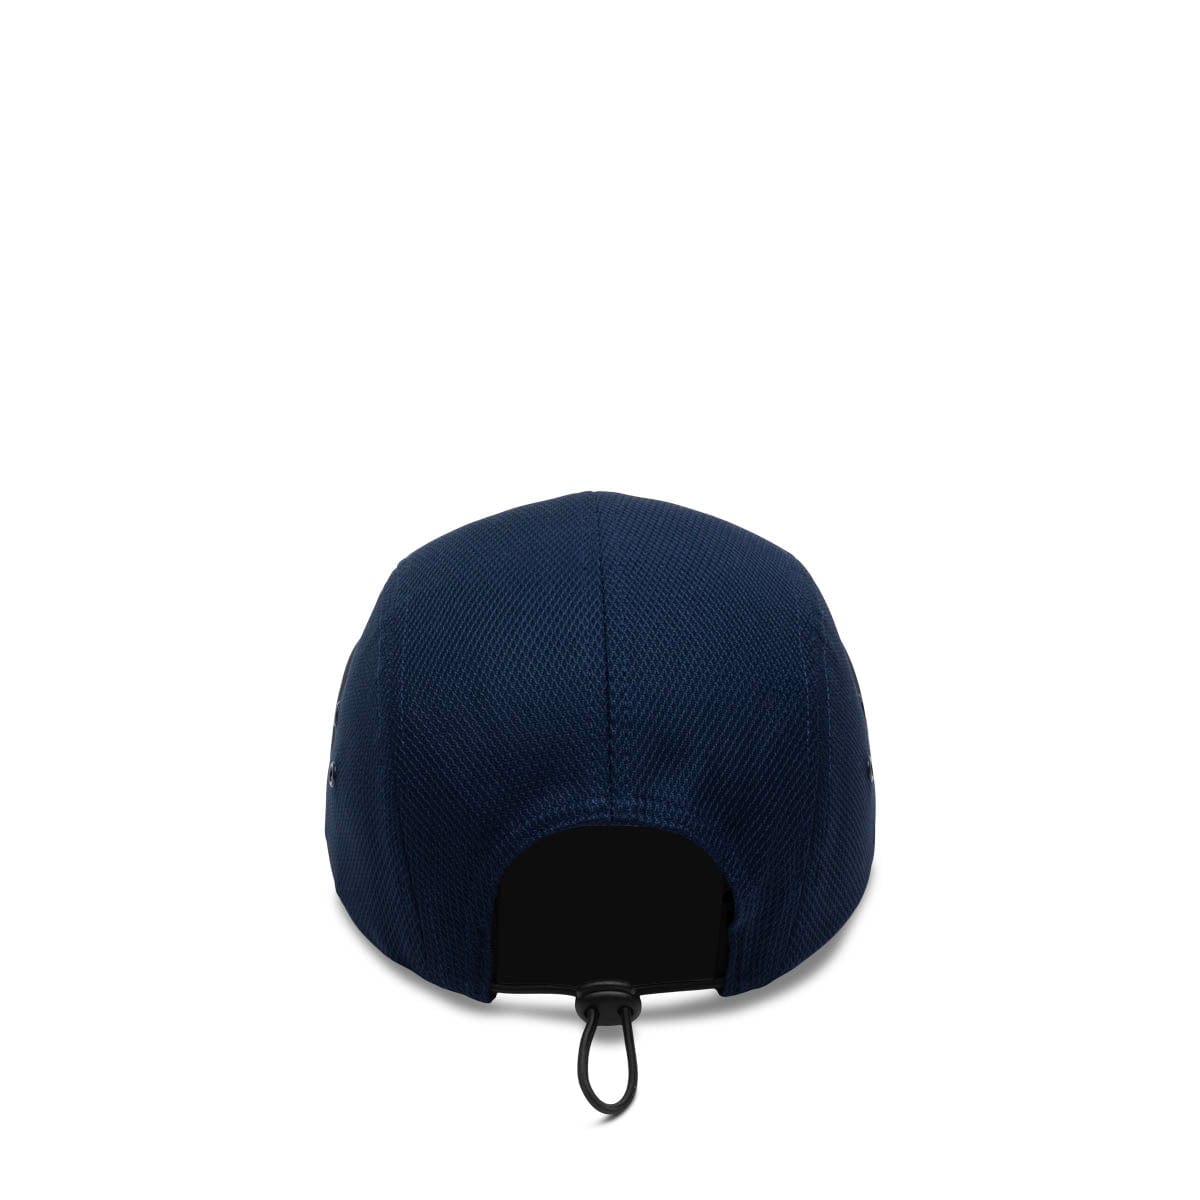 By Parra Headwear NAVY / O/S CLASSIC LOGO VOLLEY HAT